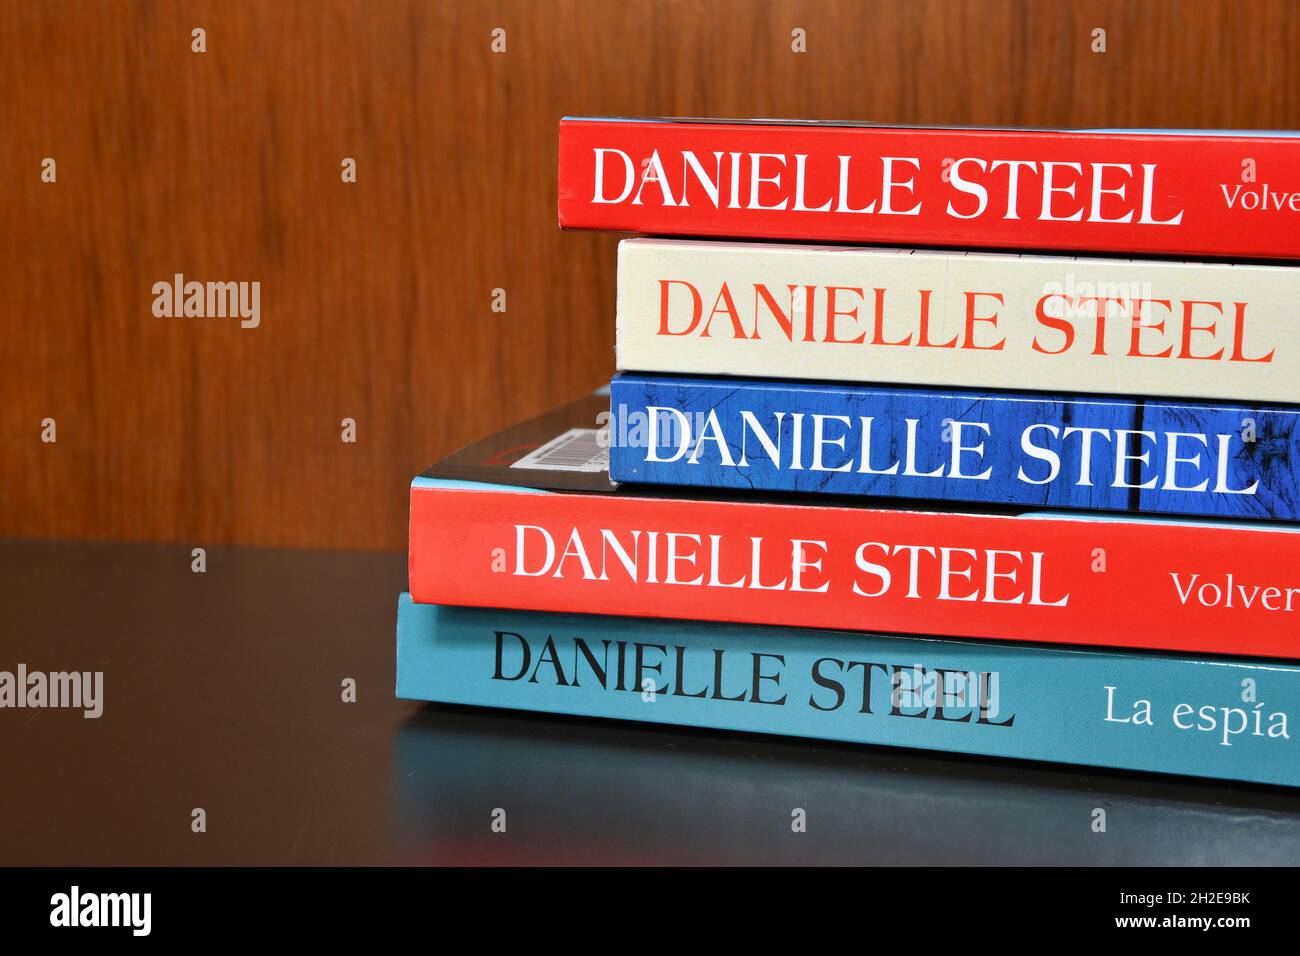 Book spines in various colors of assorted Spanish translations of books by Danielle Steel with the author's name in block capital letters. Stock Photo